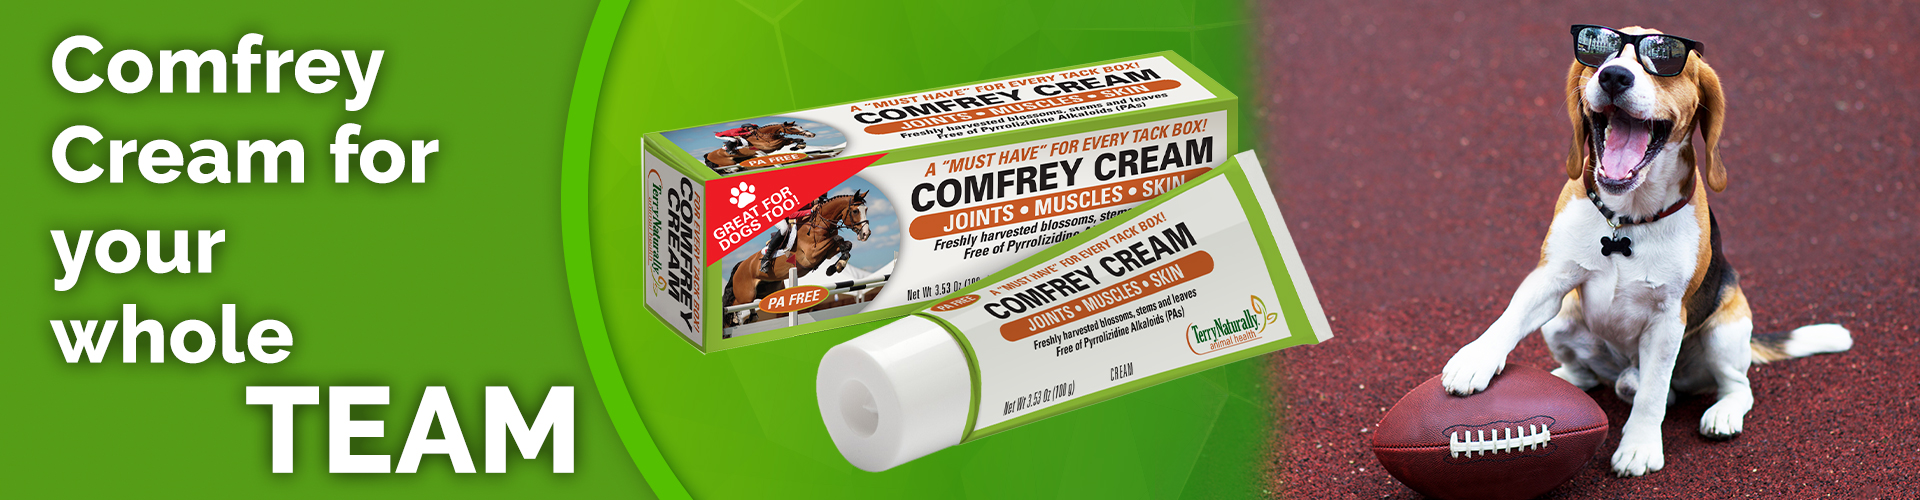 Comfrey Cream for your whole TEAM